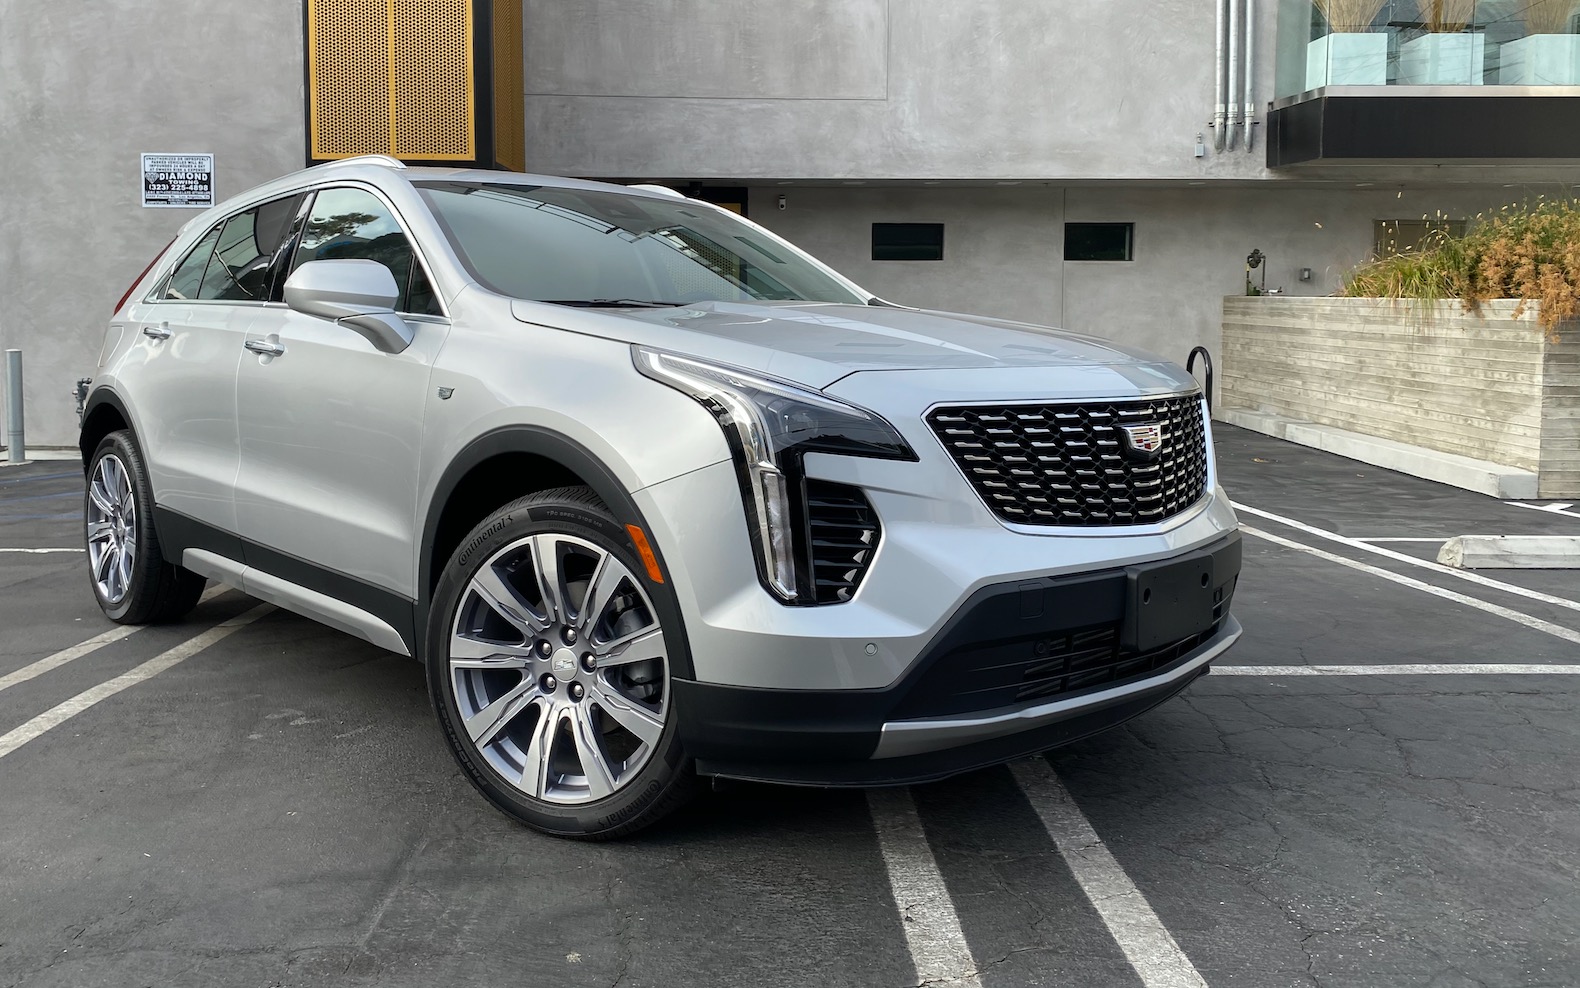 2020 Cadillac XT4 Review: Stylish and Spacious - The Torque Report